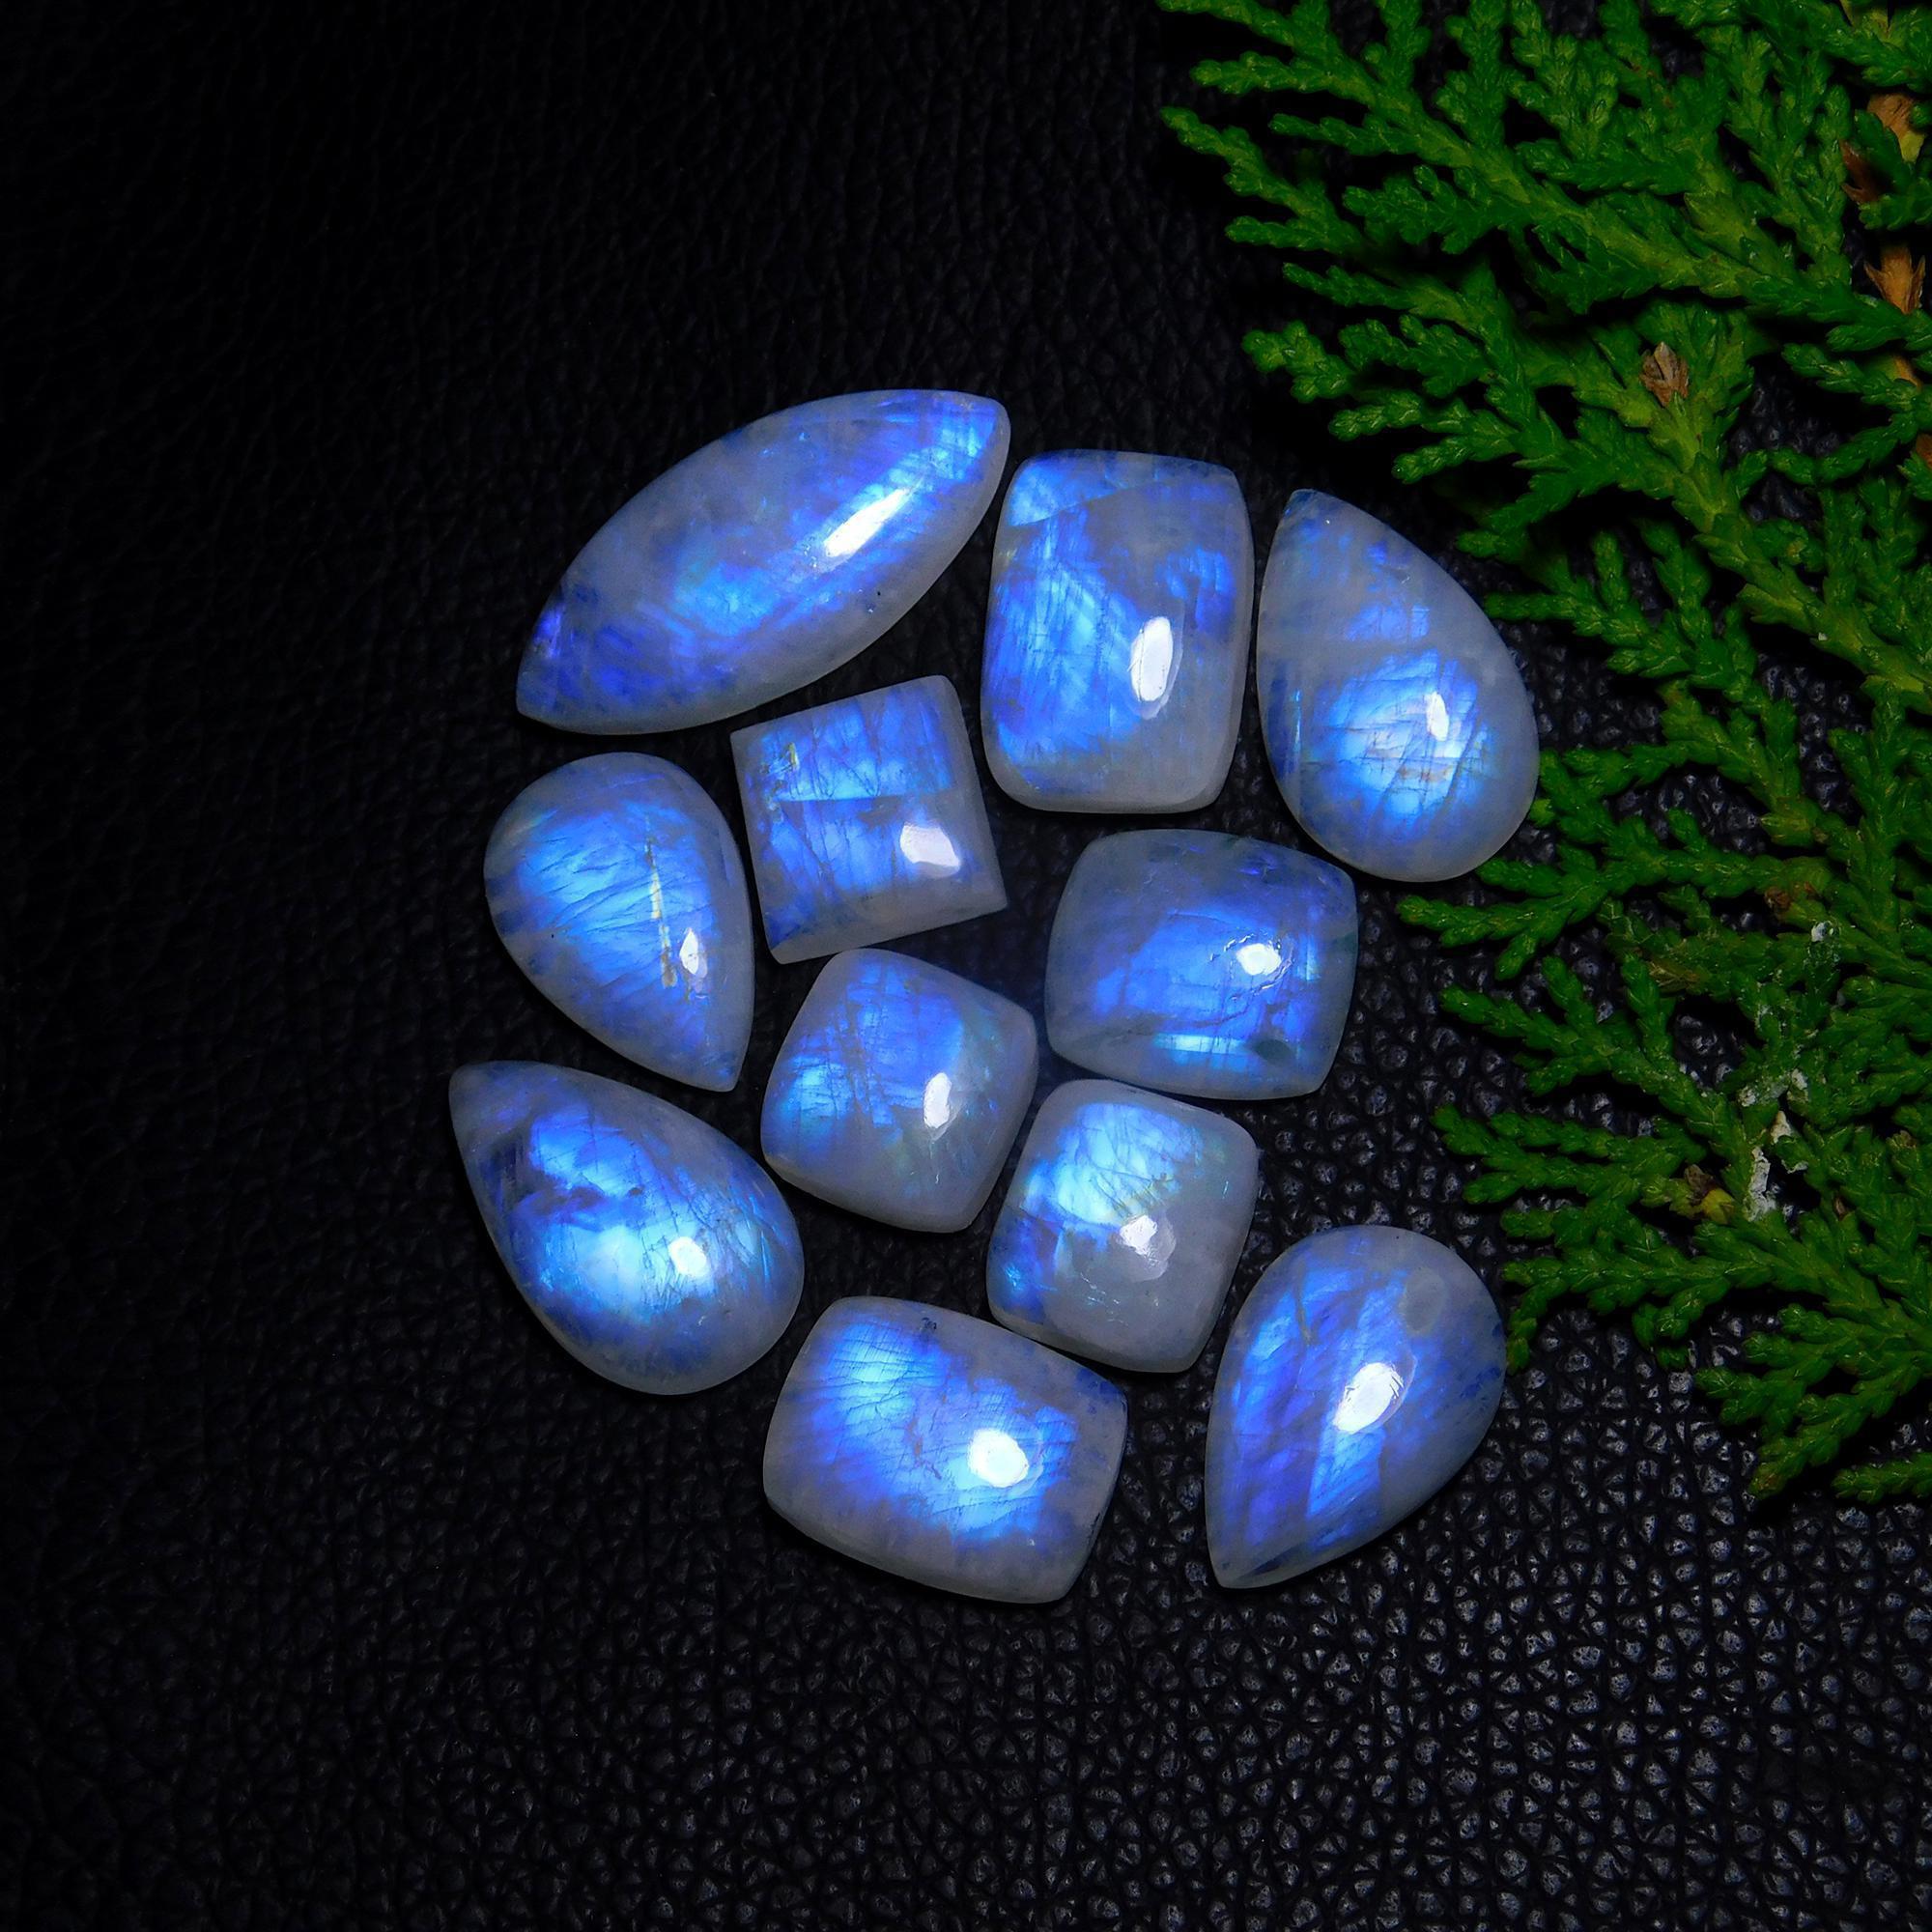 11Pcs 142Cts Natural Rainbow Moonstone Cabochon Blue Fire Loose Gemstone Crystal jewelry supplies wholesale lot gift for her Black Friday 30X14 14X14mm#9412